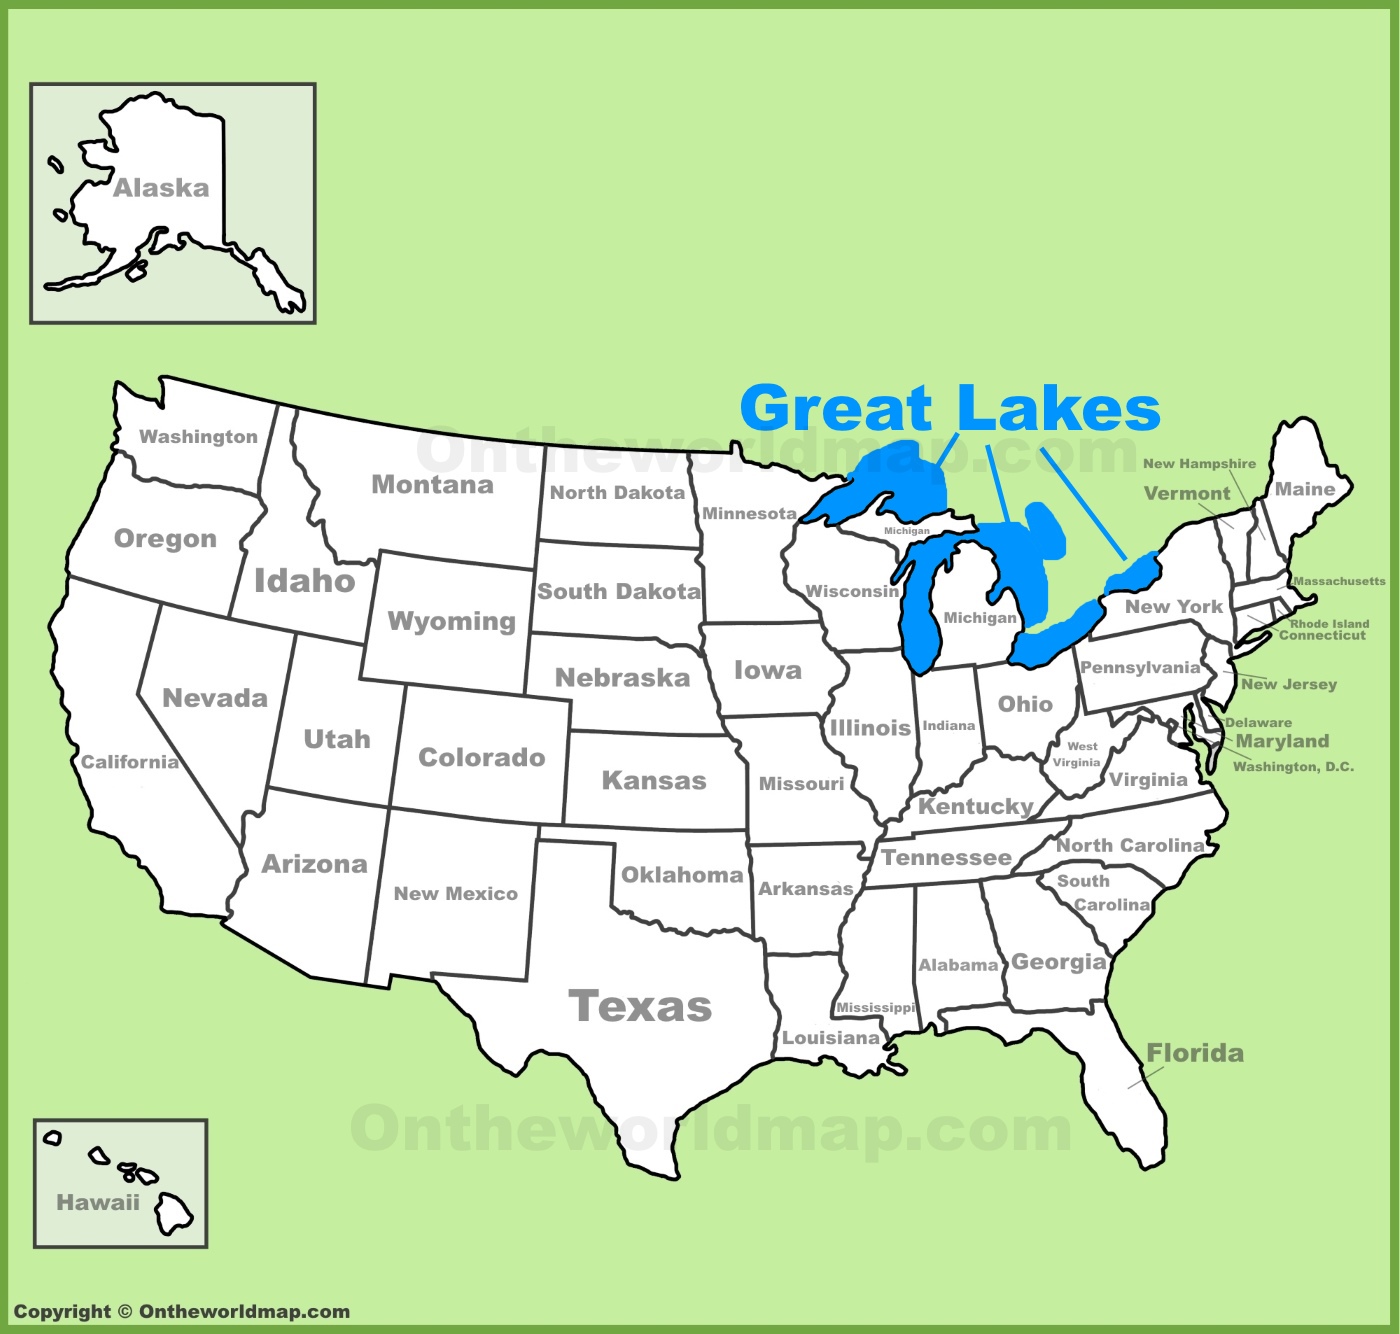 Great Lakes Maps Maps Of Great Lakes